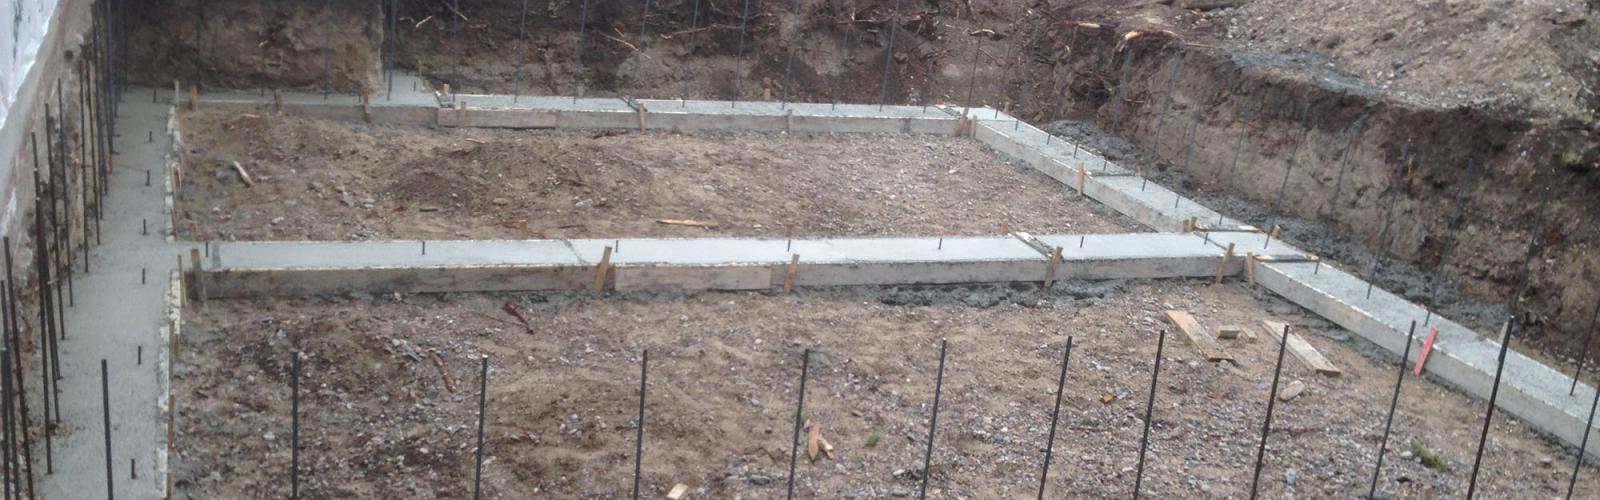 concrete footing and rebar